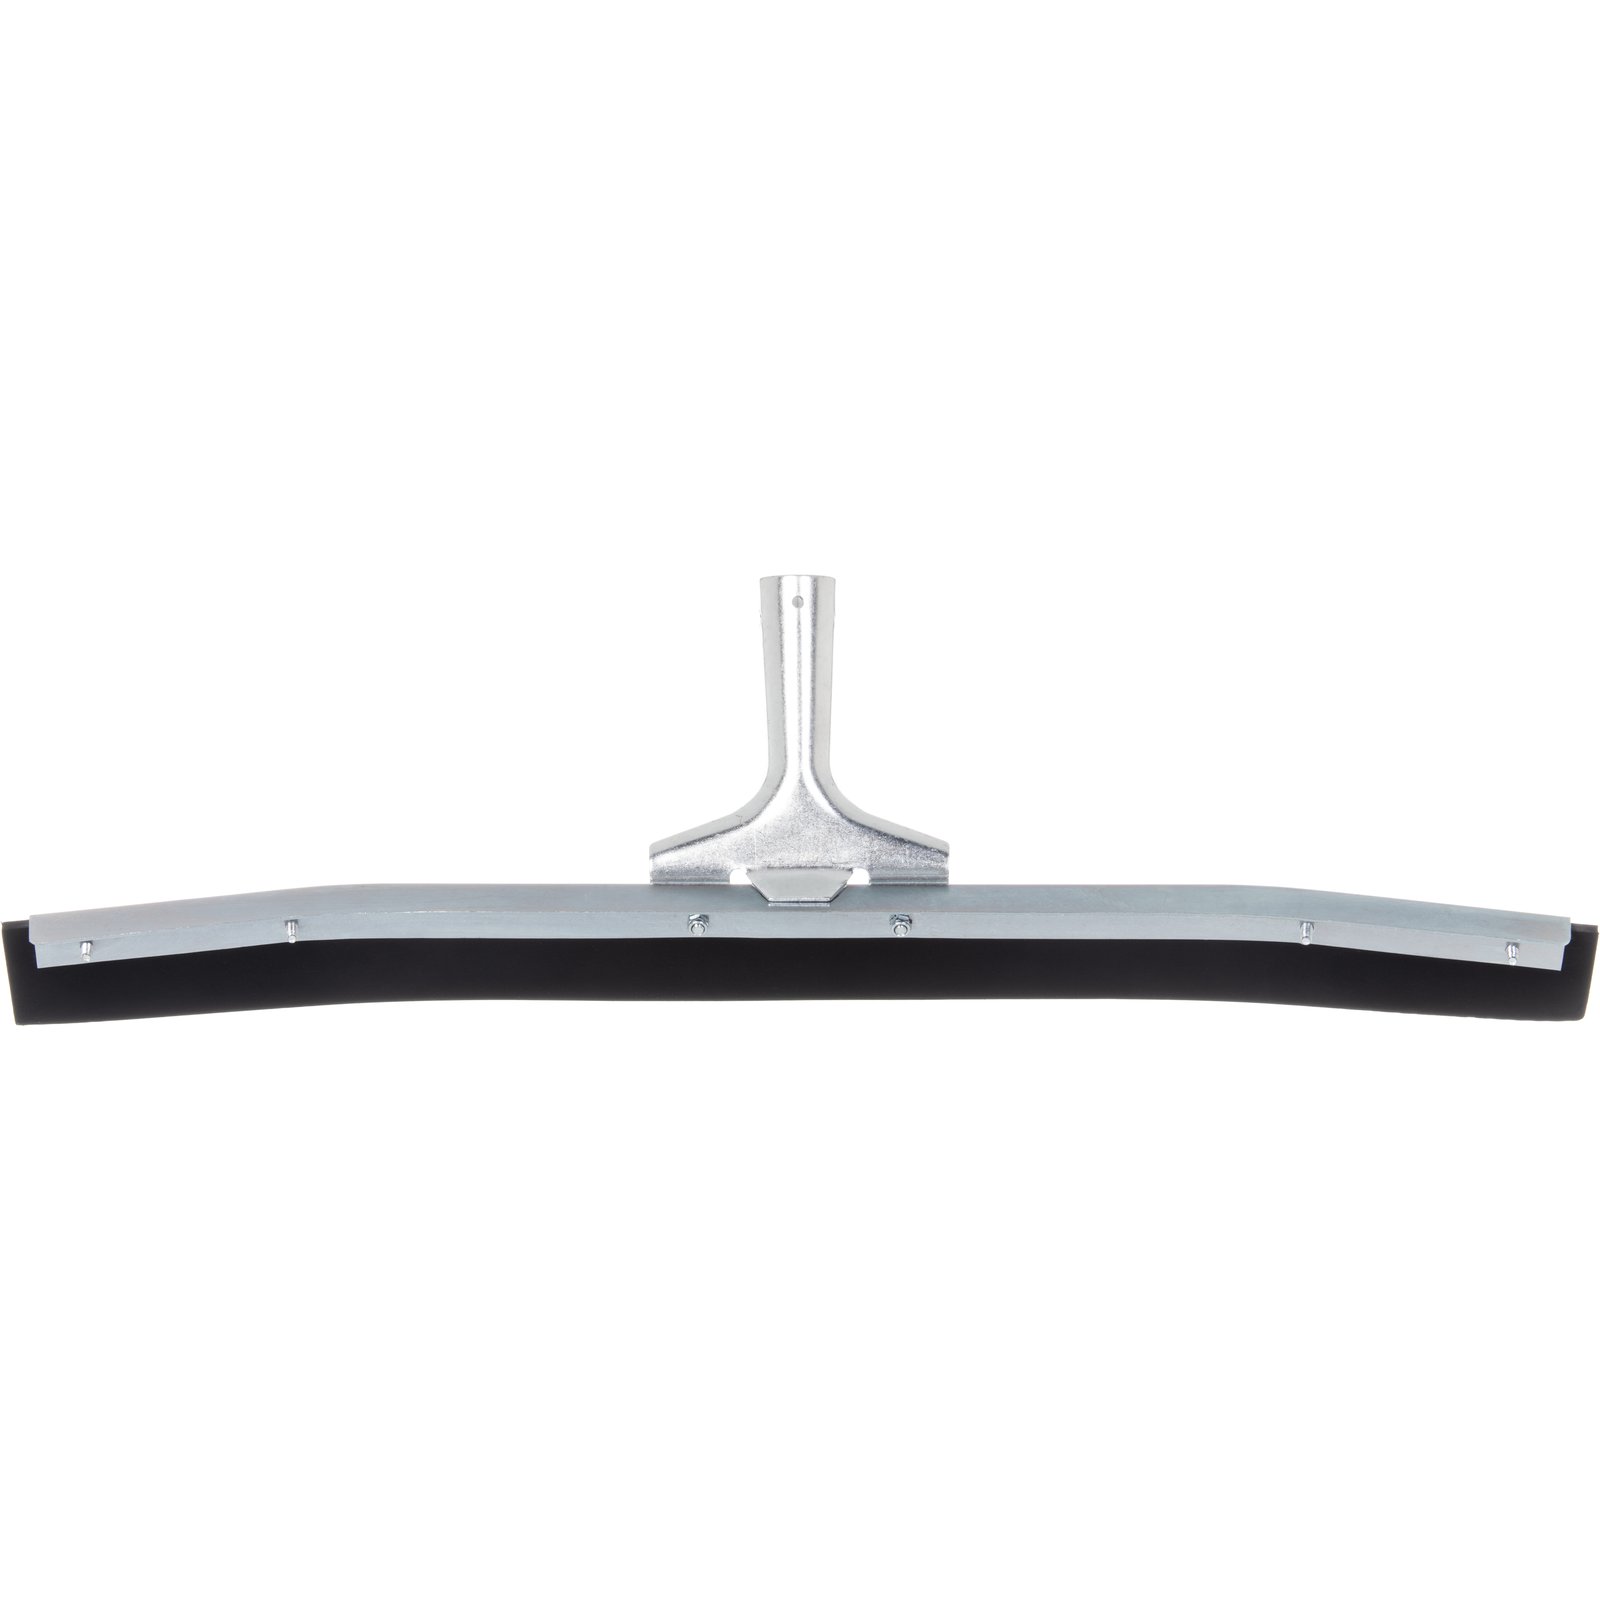 24&quot; BLACK CURVED END RUBBER
SQUEEGEE